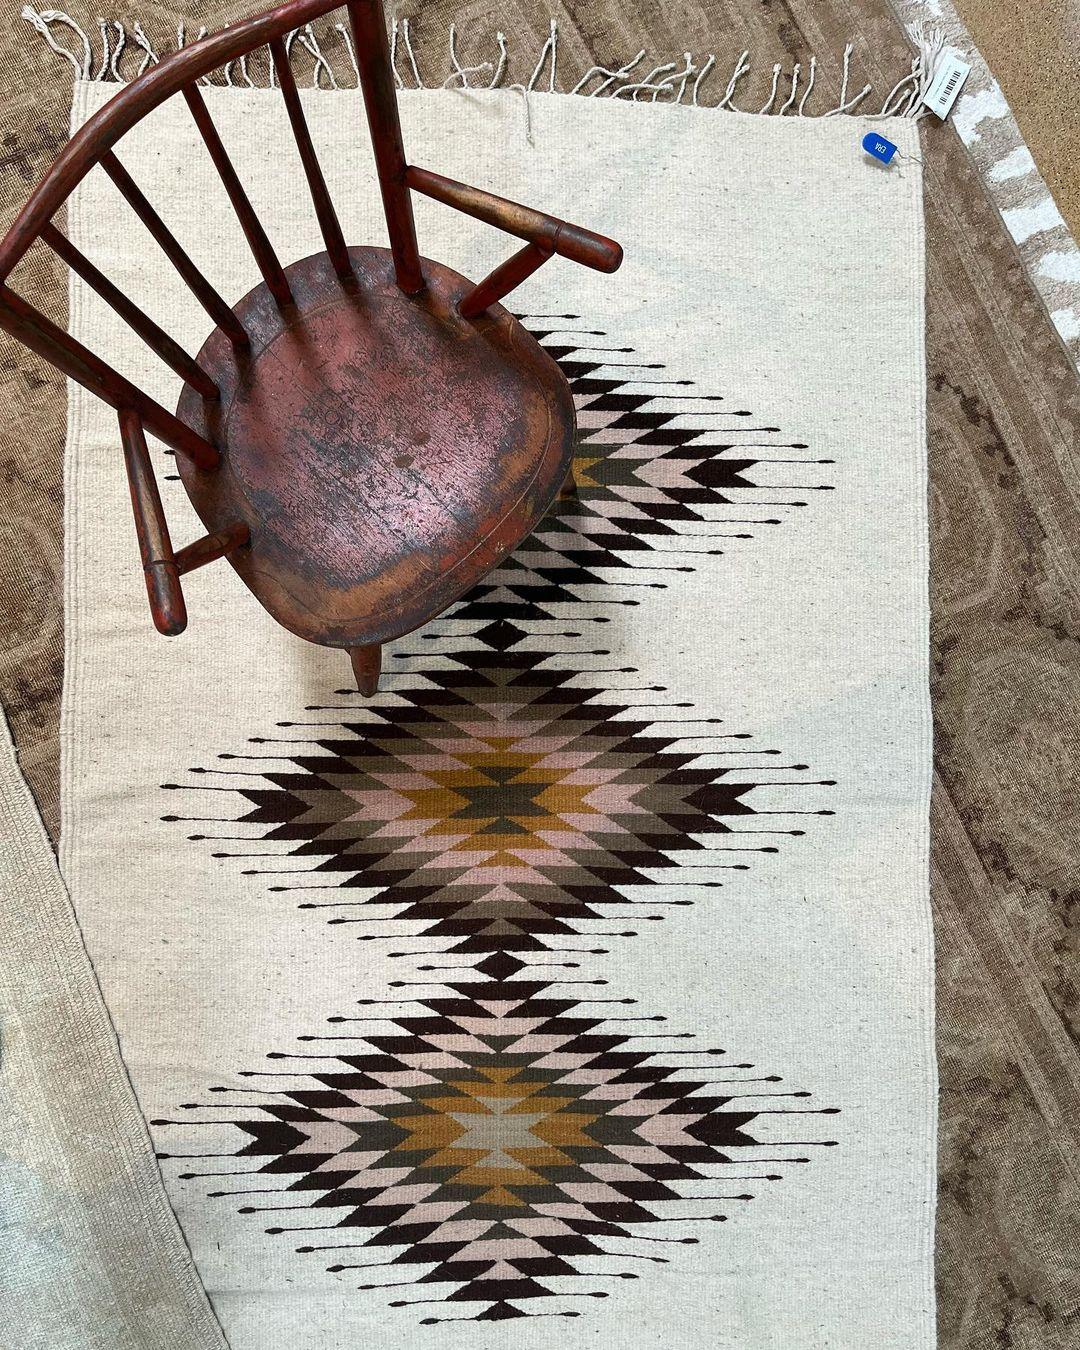 78150 Vintage New Mexico Kilim rug with Navajo two Grey Hills Style 03'00 x 05'00. With its bold expressive design, incredible detail and texture, this hand-woven wool vintage New Mexico Kilim rug is a captivating vision of woven beauty highlighting